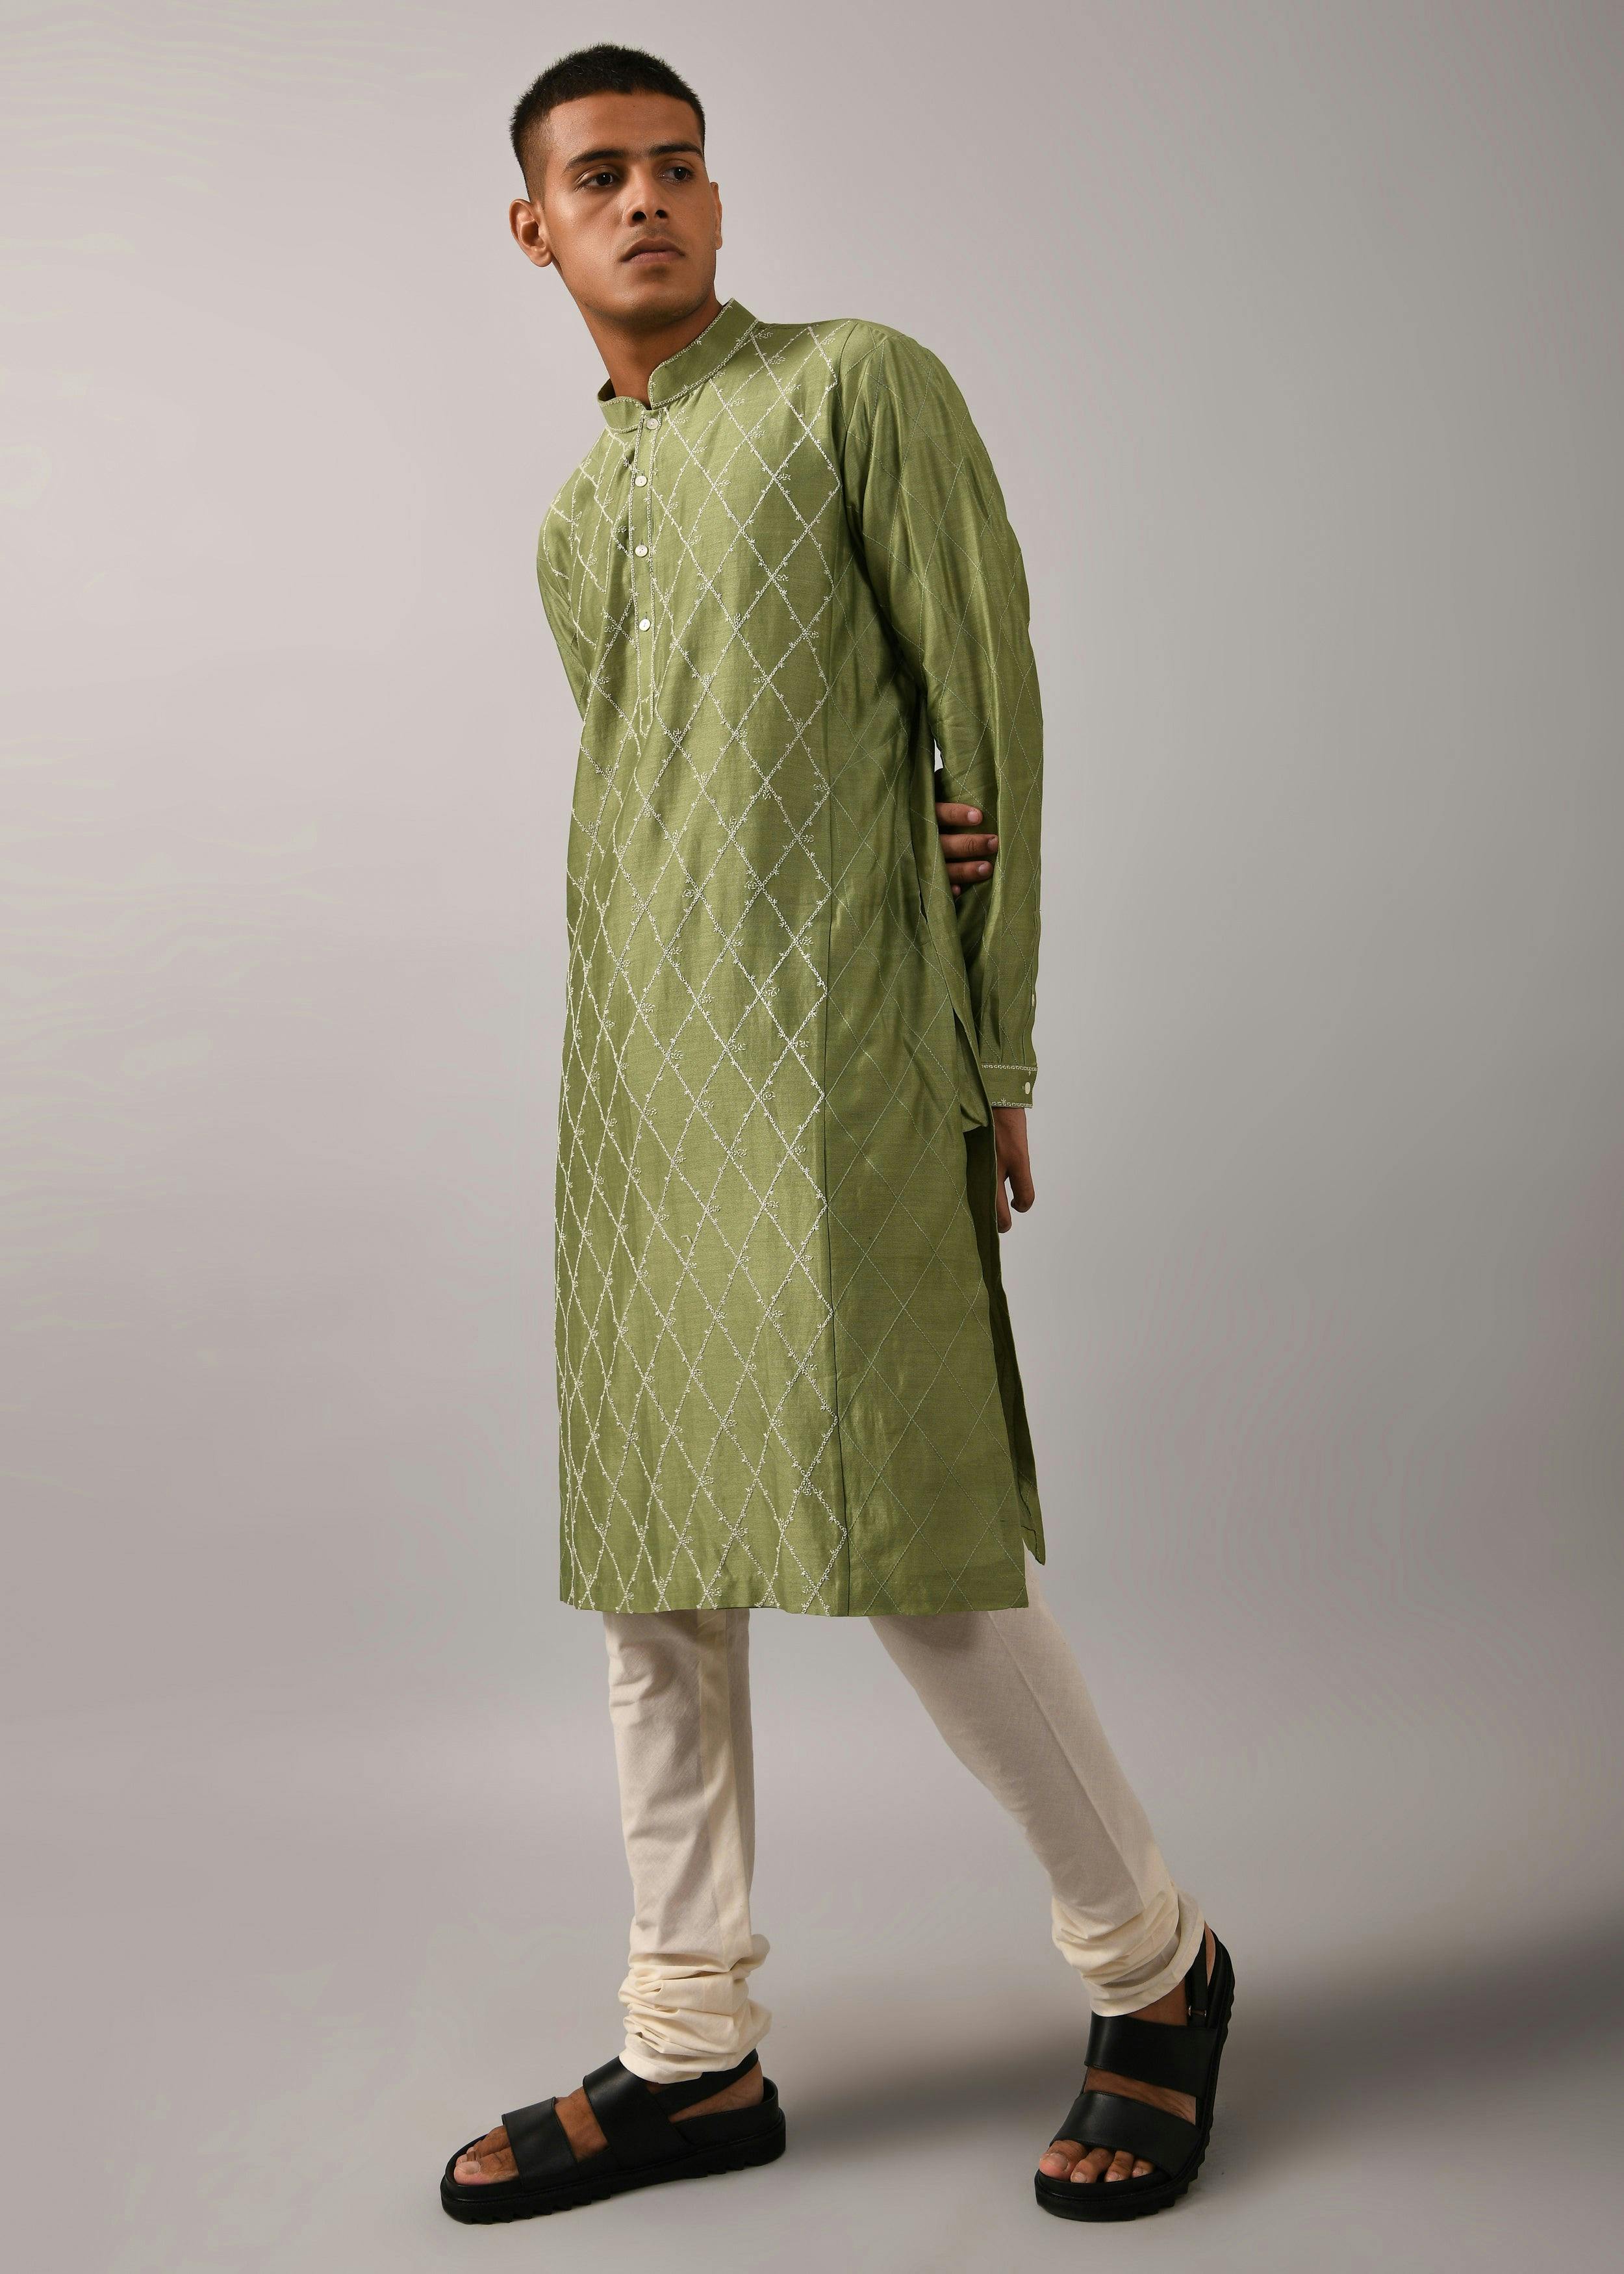 Diamond Pattern Hand Embroidered Kurta Set, a product by Country Made